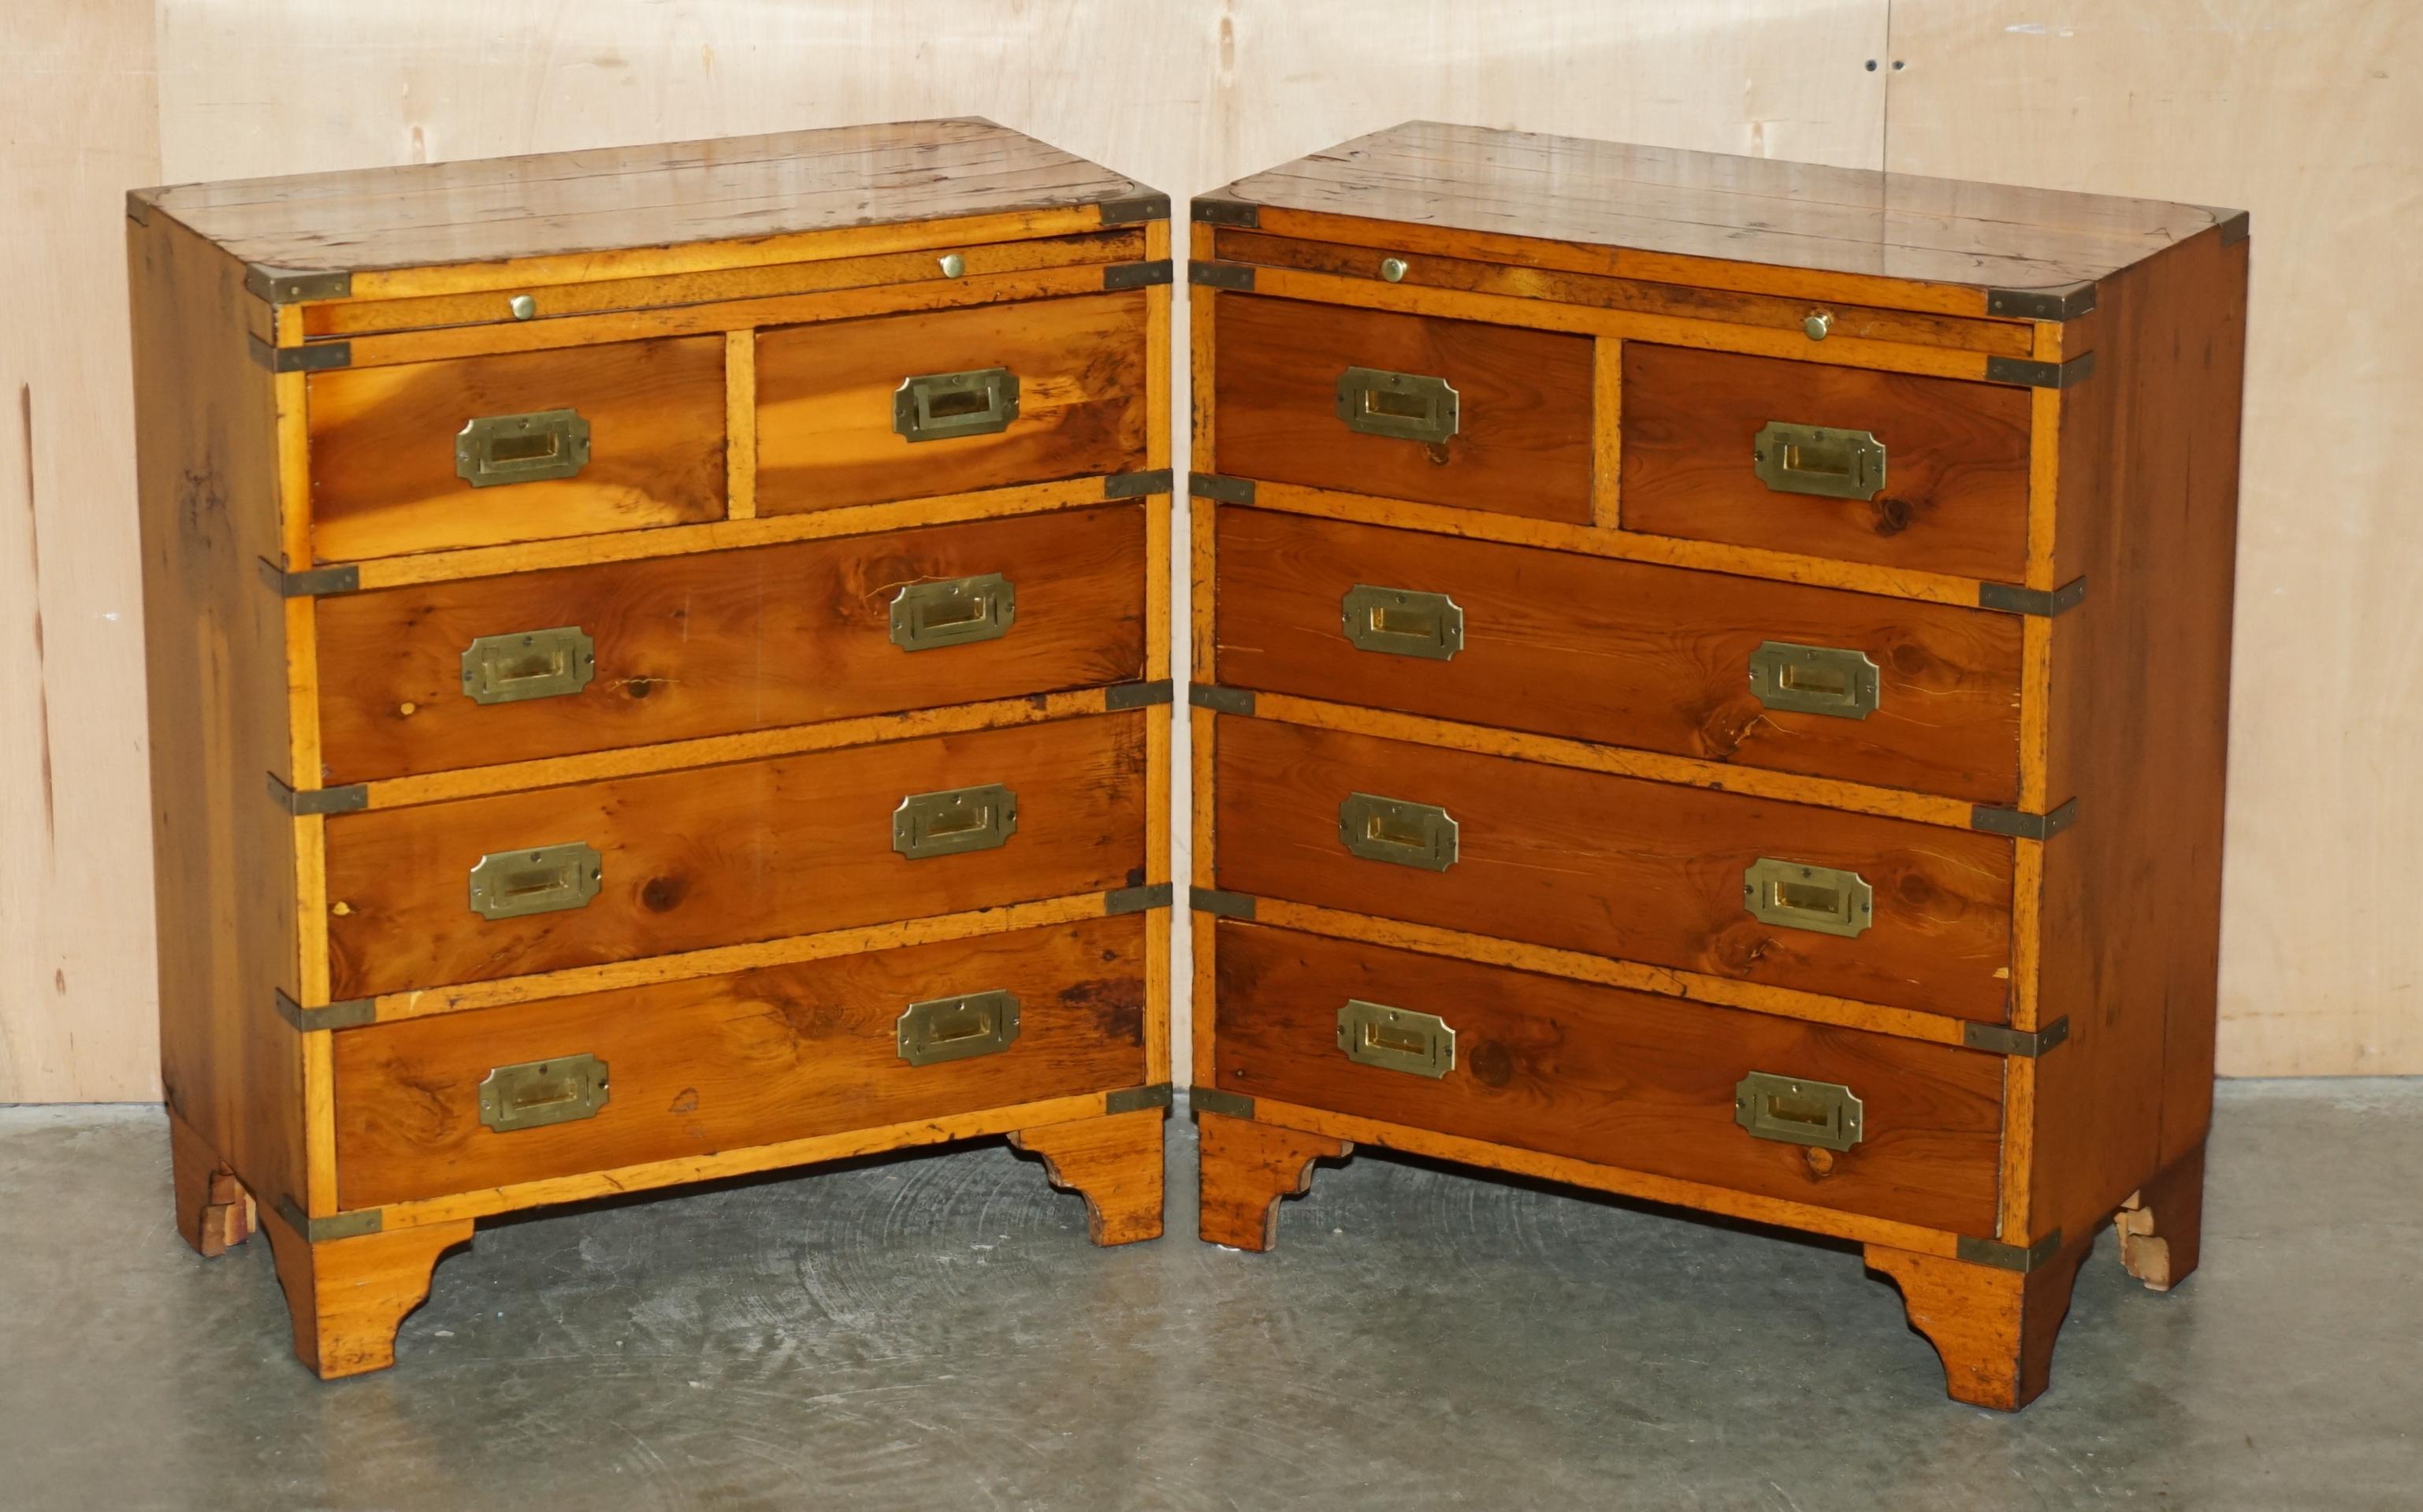 Royal House Antiques

Royal House Antiques is delighted to offer for sale this lovely pair of vintage Burr Yew wood & brass mounted Military Campaign style side tables with drawers that have well patinated tops and butlers slip serving trays